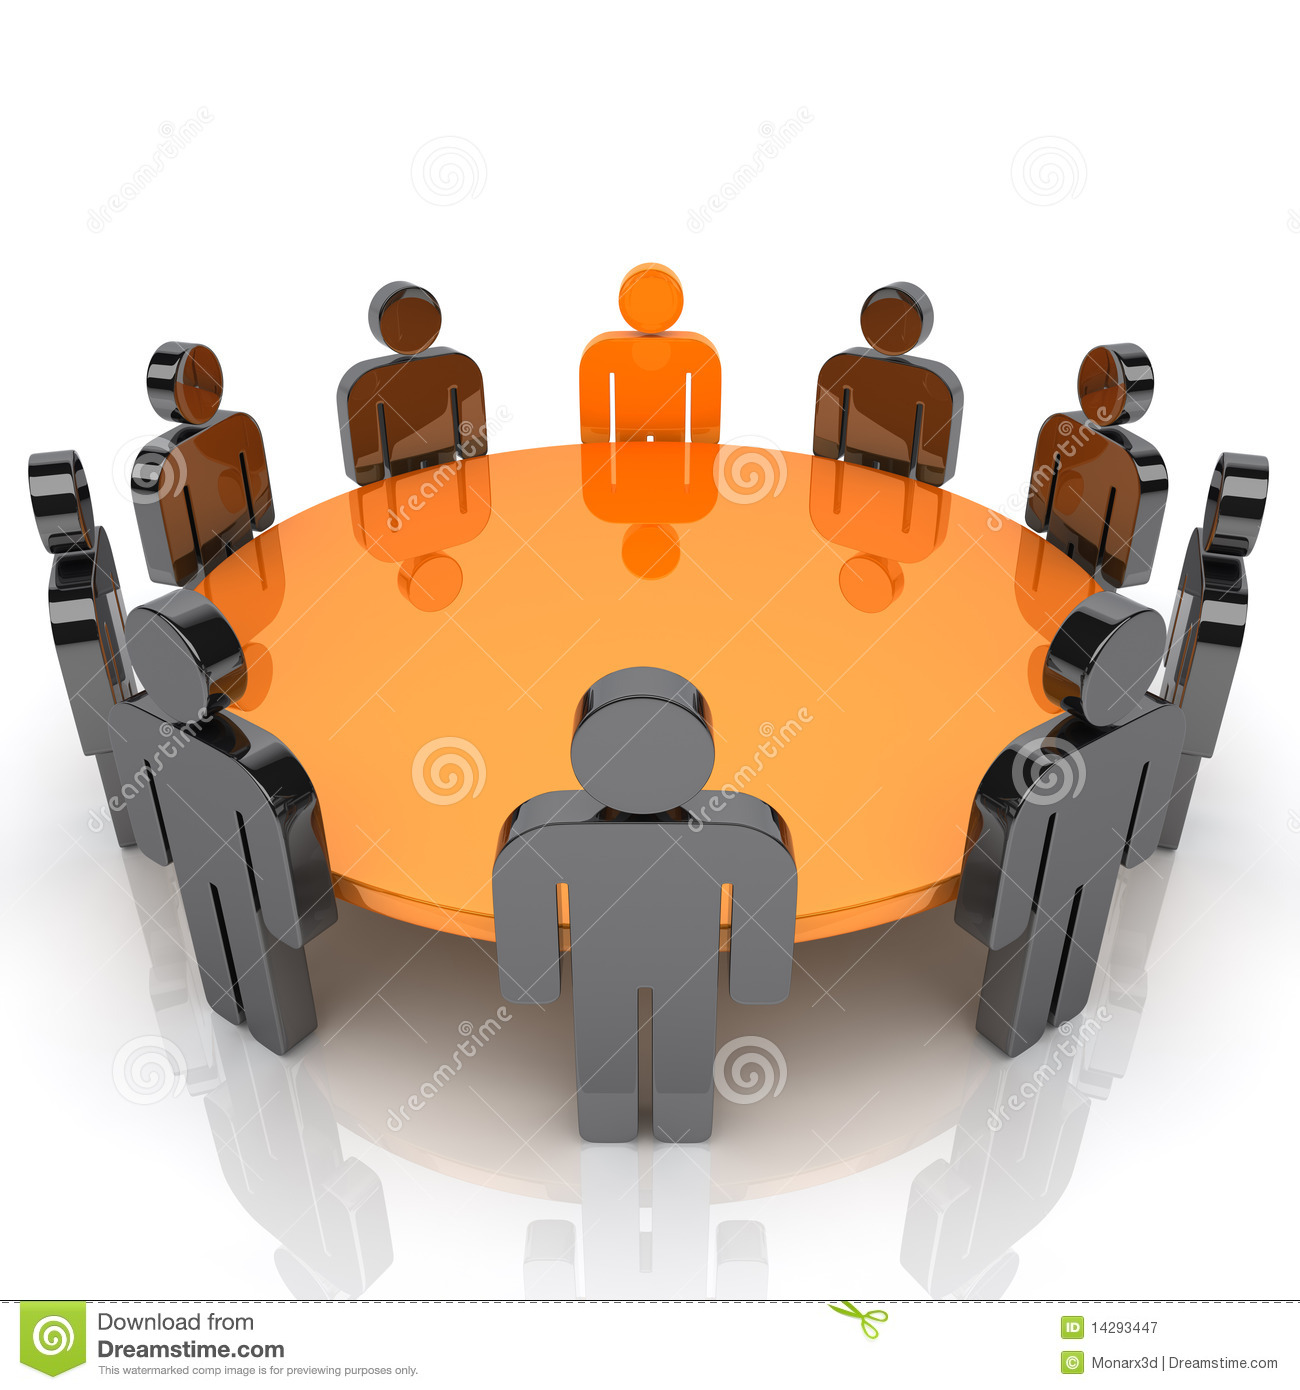 Meeting With Leader Royalty Free Stock Photography   Image  14293447